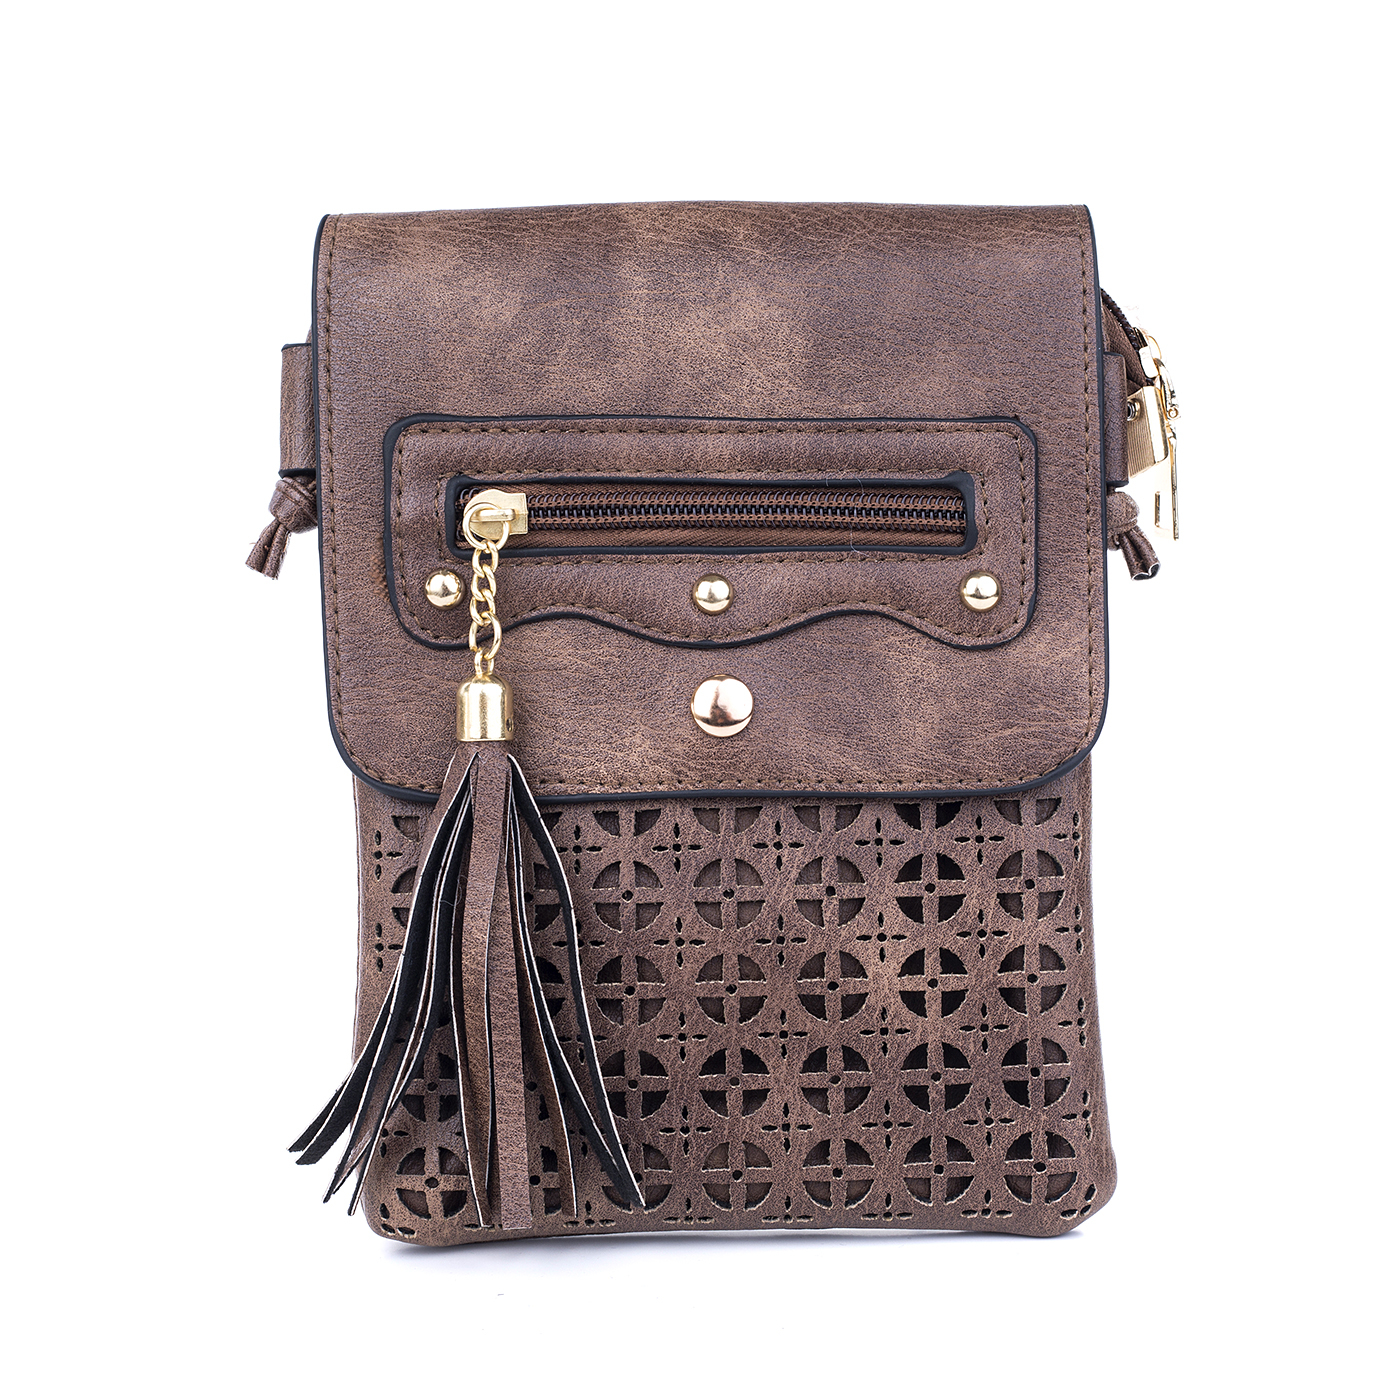 *NEW* Crossbody Bag - Crosshatch Tassel:  
Enjoy the perfect, outfit addition with our Crosshatch Tassel Crossbody Bag - the ultimate complement to your style!! Find your shade from our selection, and be su - Ciao Bella Dresses